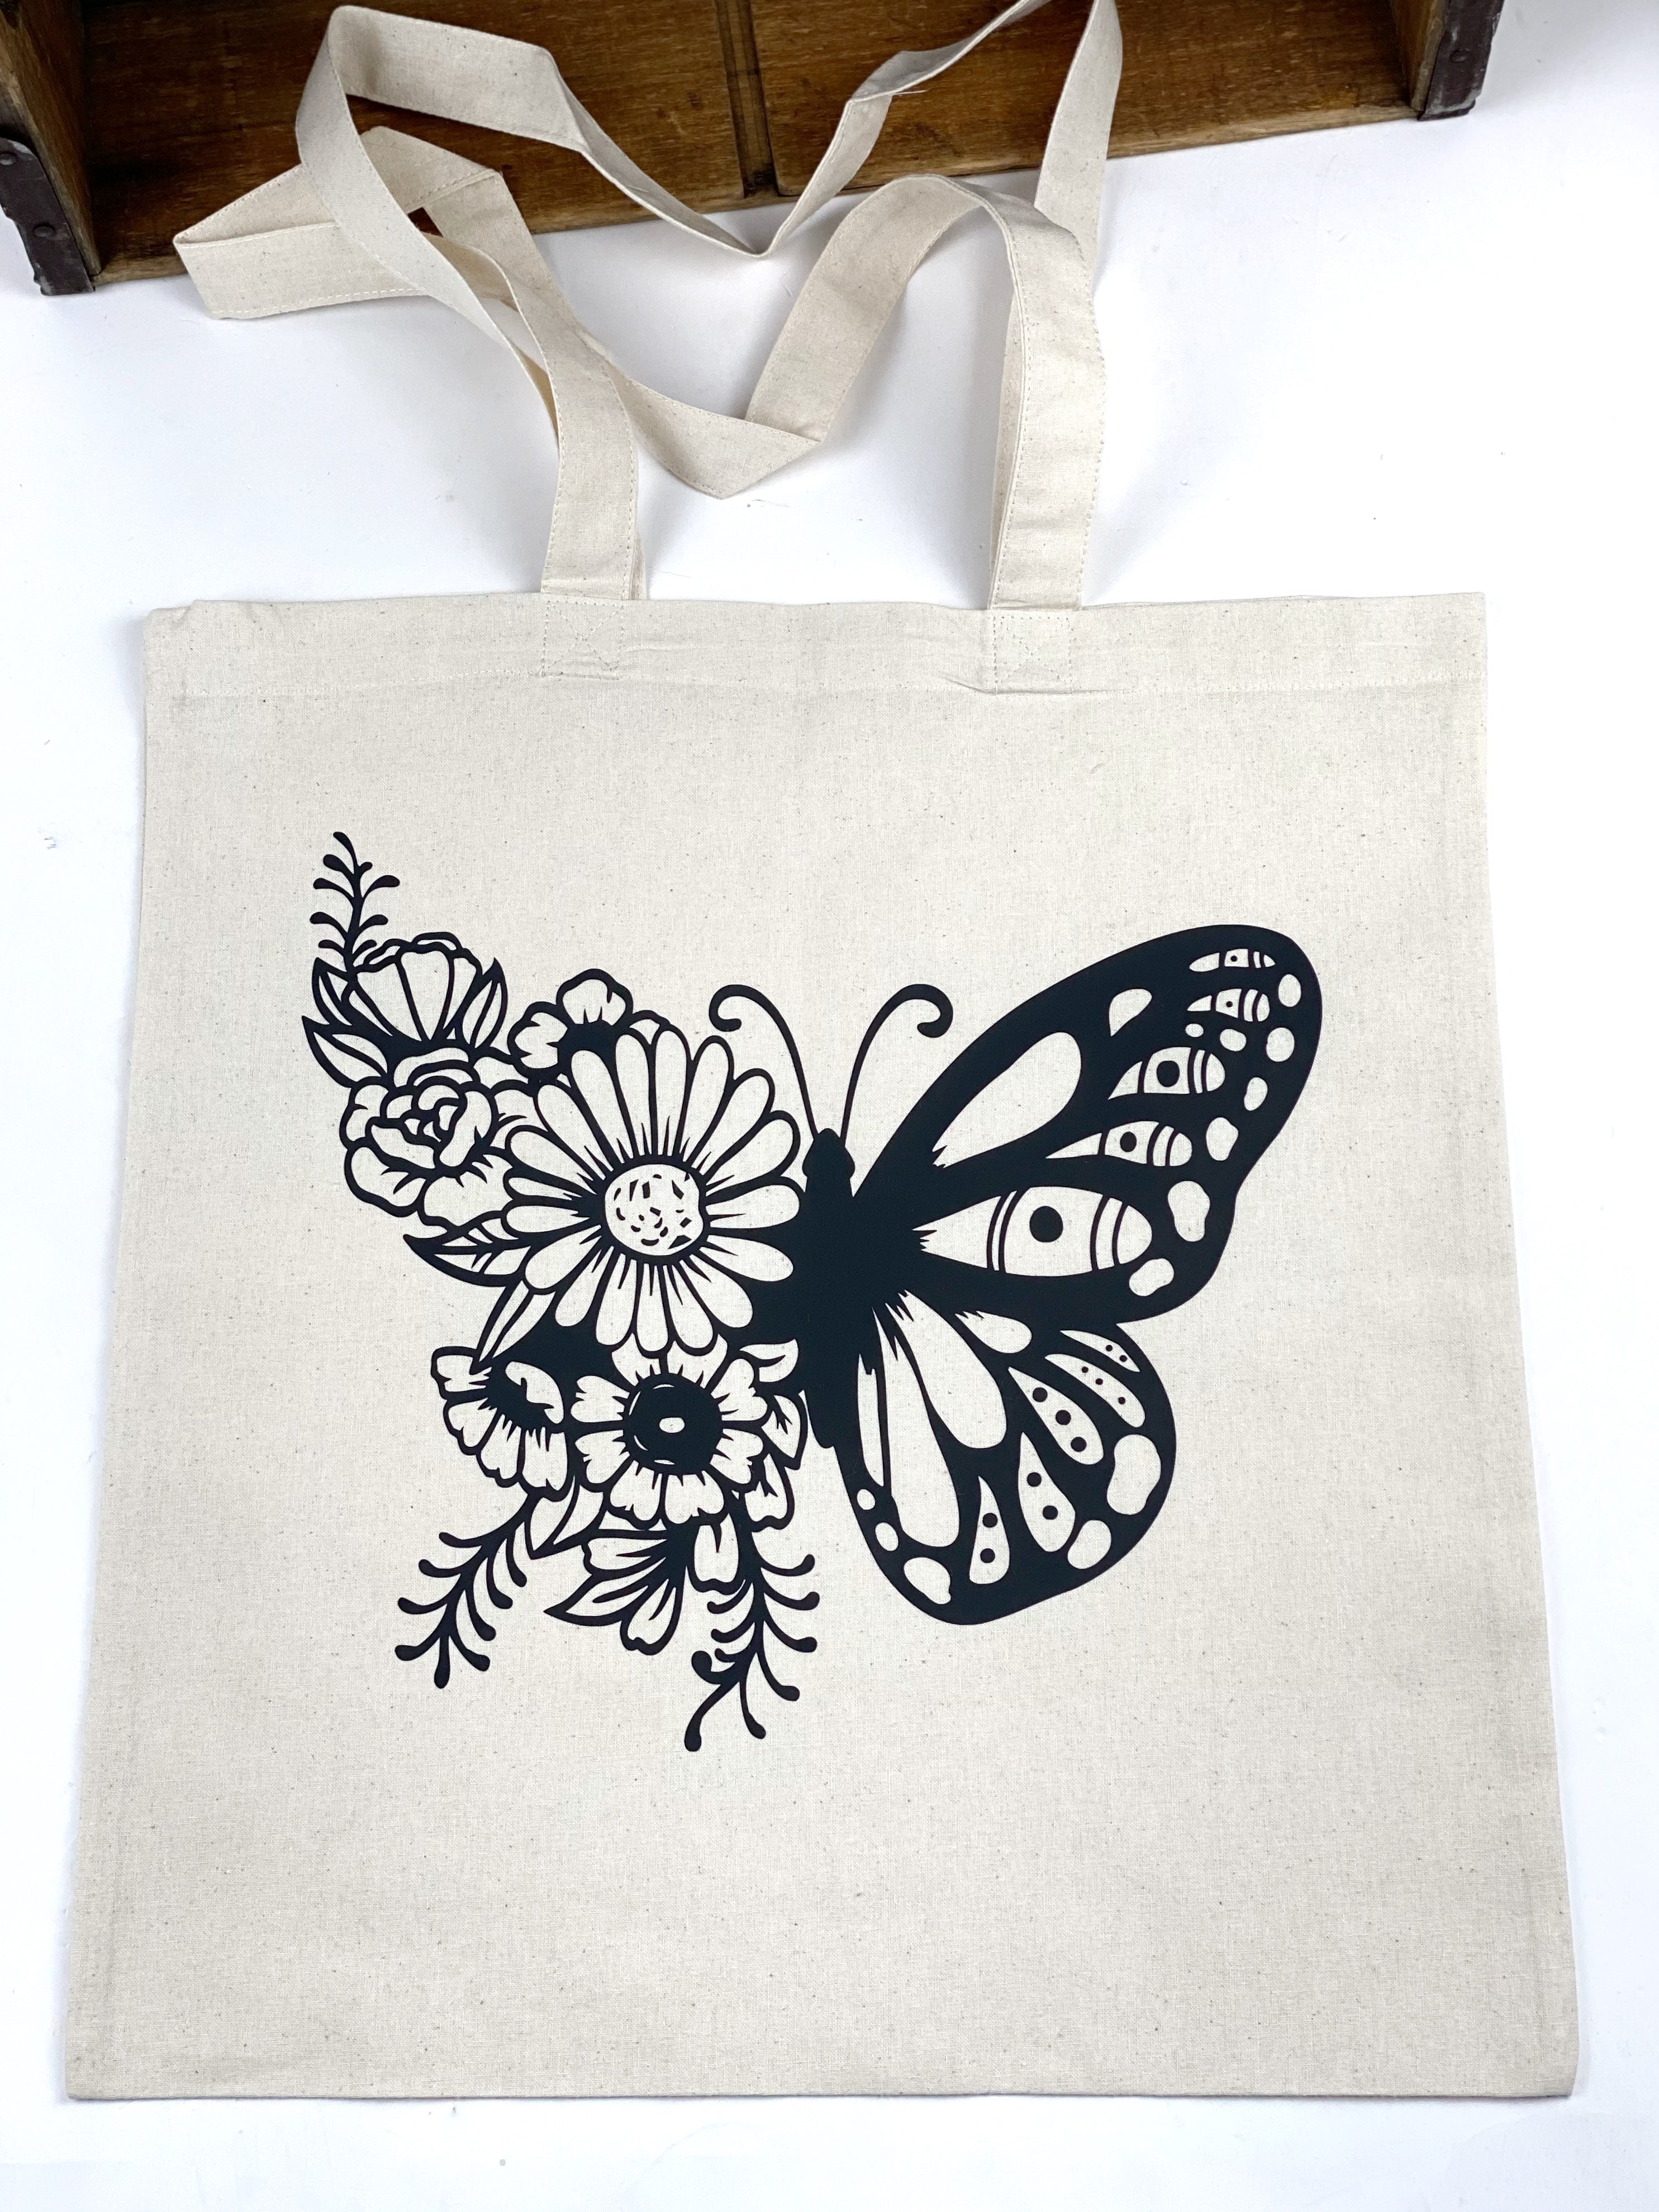 Butterfly Floral Cotton Tote Bag, Lightweight Thin Natural Cotton Tote Bag, Reusable Tote Bag, Vinyl Butterfly Tote, Farmers Market Bag